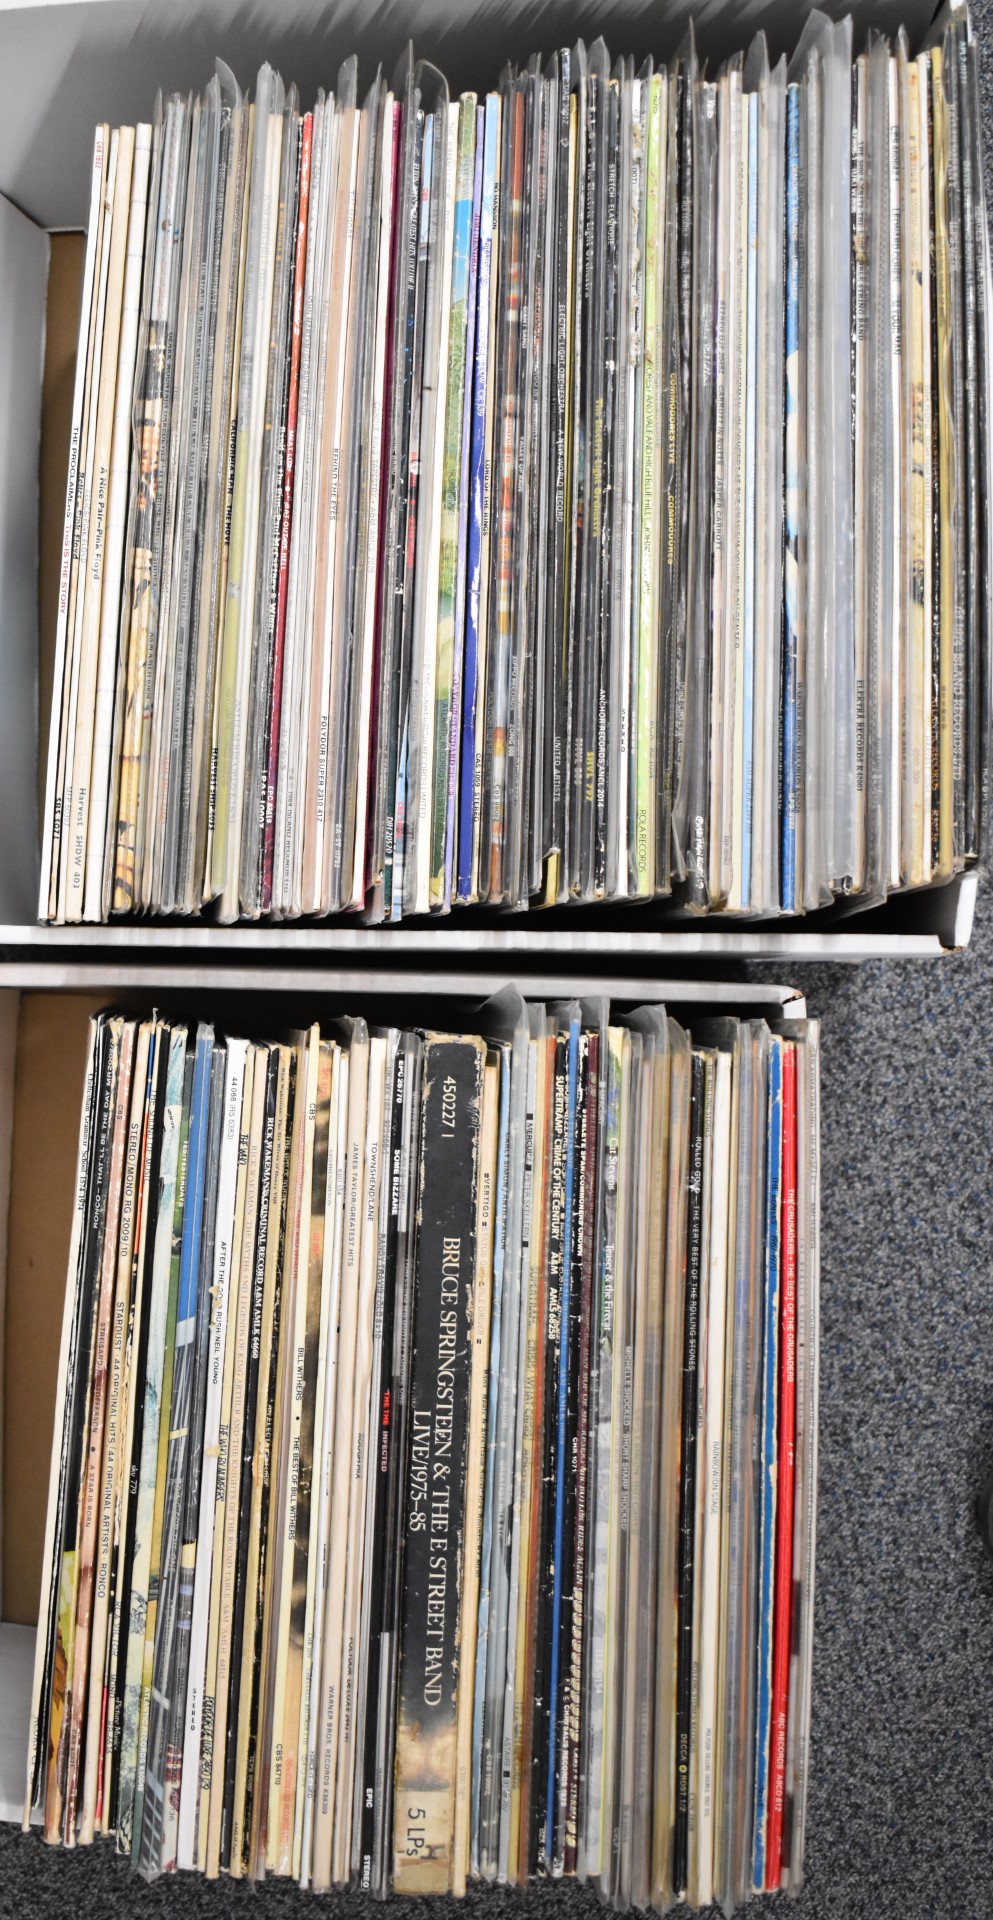 Approximately 160 albums including David Bowie, Phil Collins, ELO, Fleetwood Mac, Carole King, - Image 5 of 5